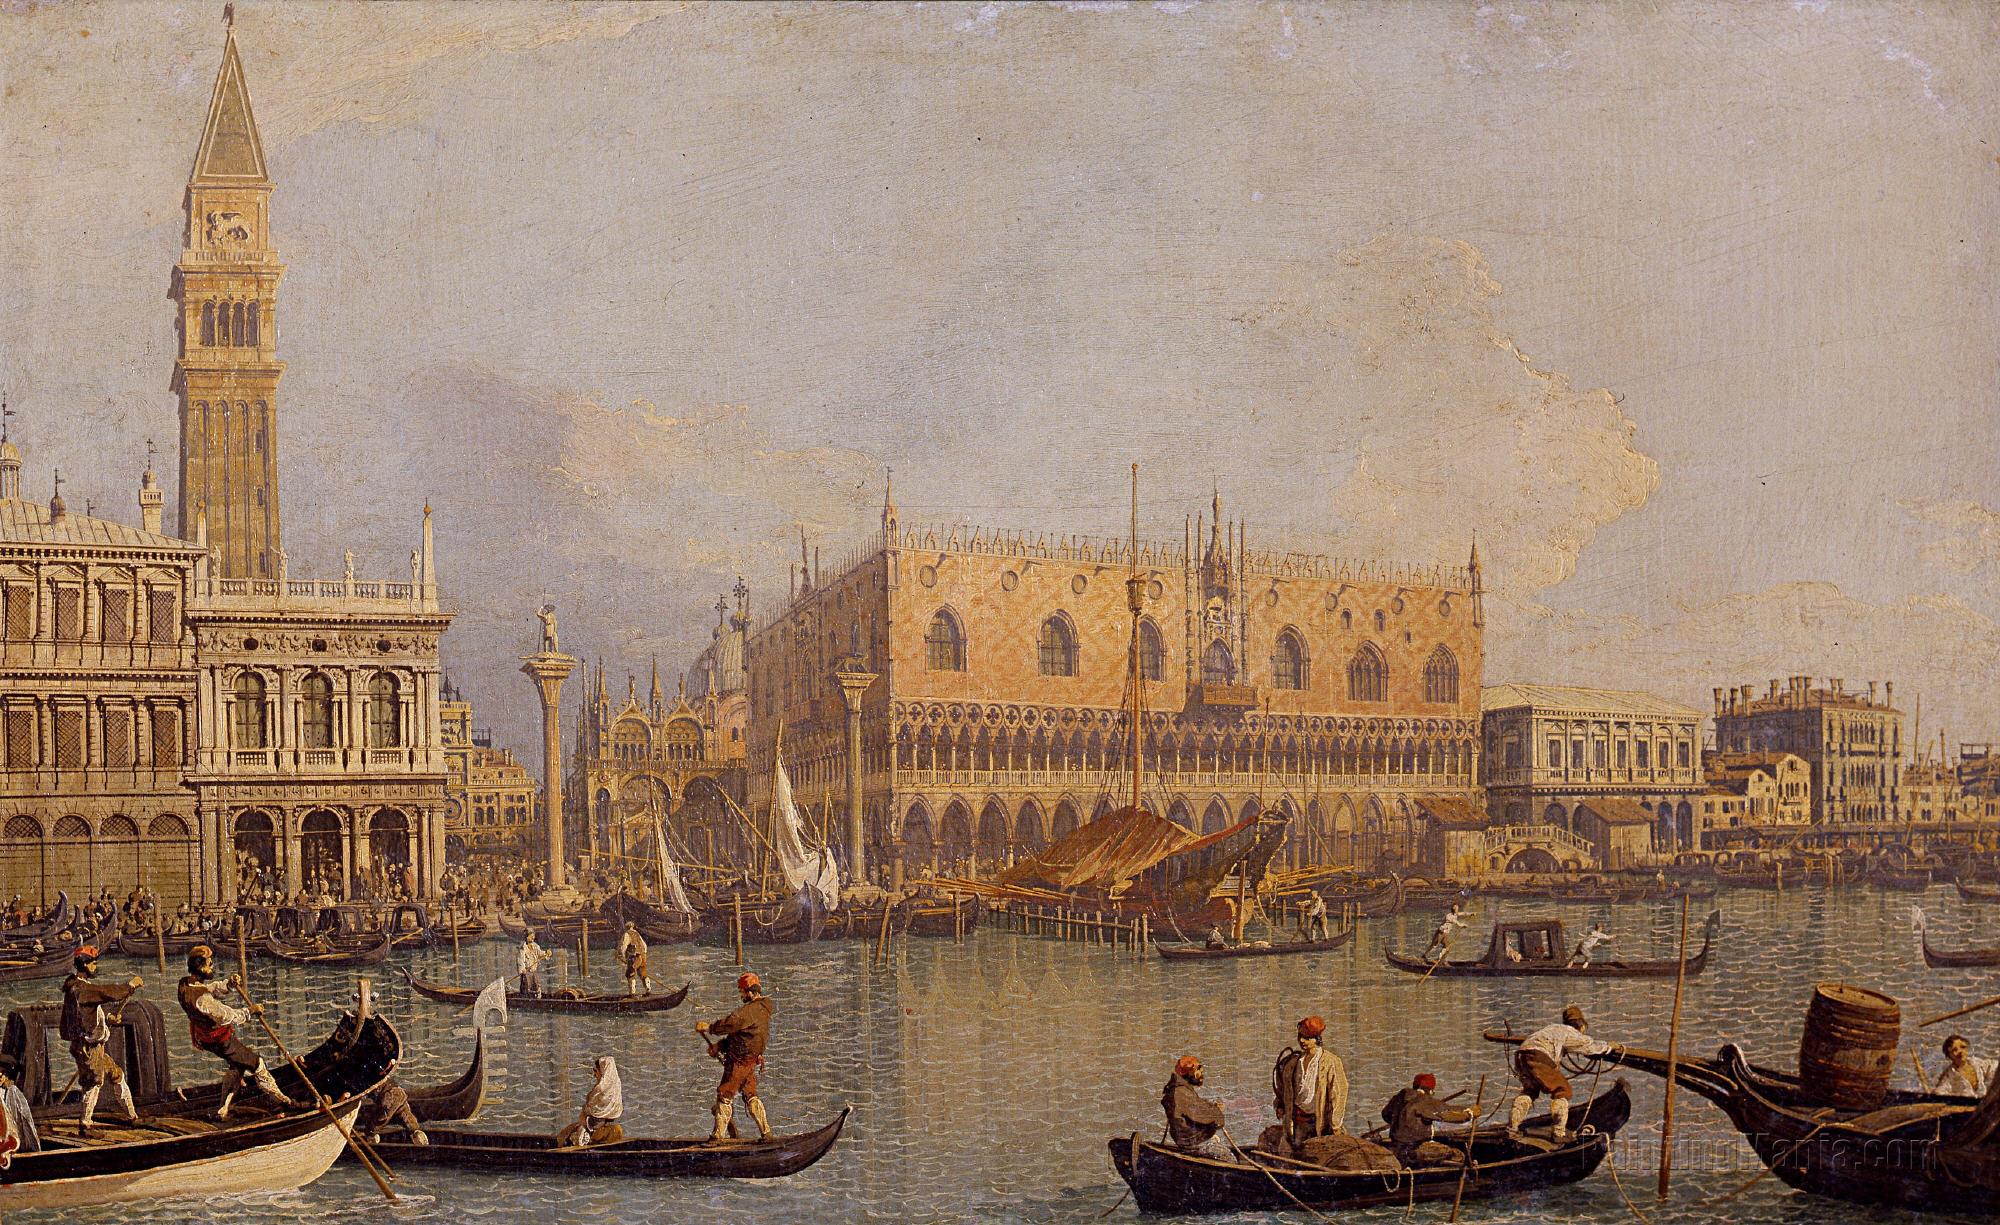 The Doge's Palace with the Piazza di San Marco